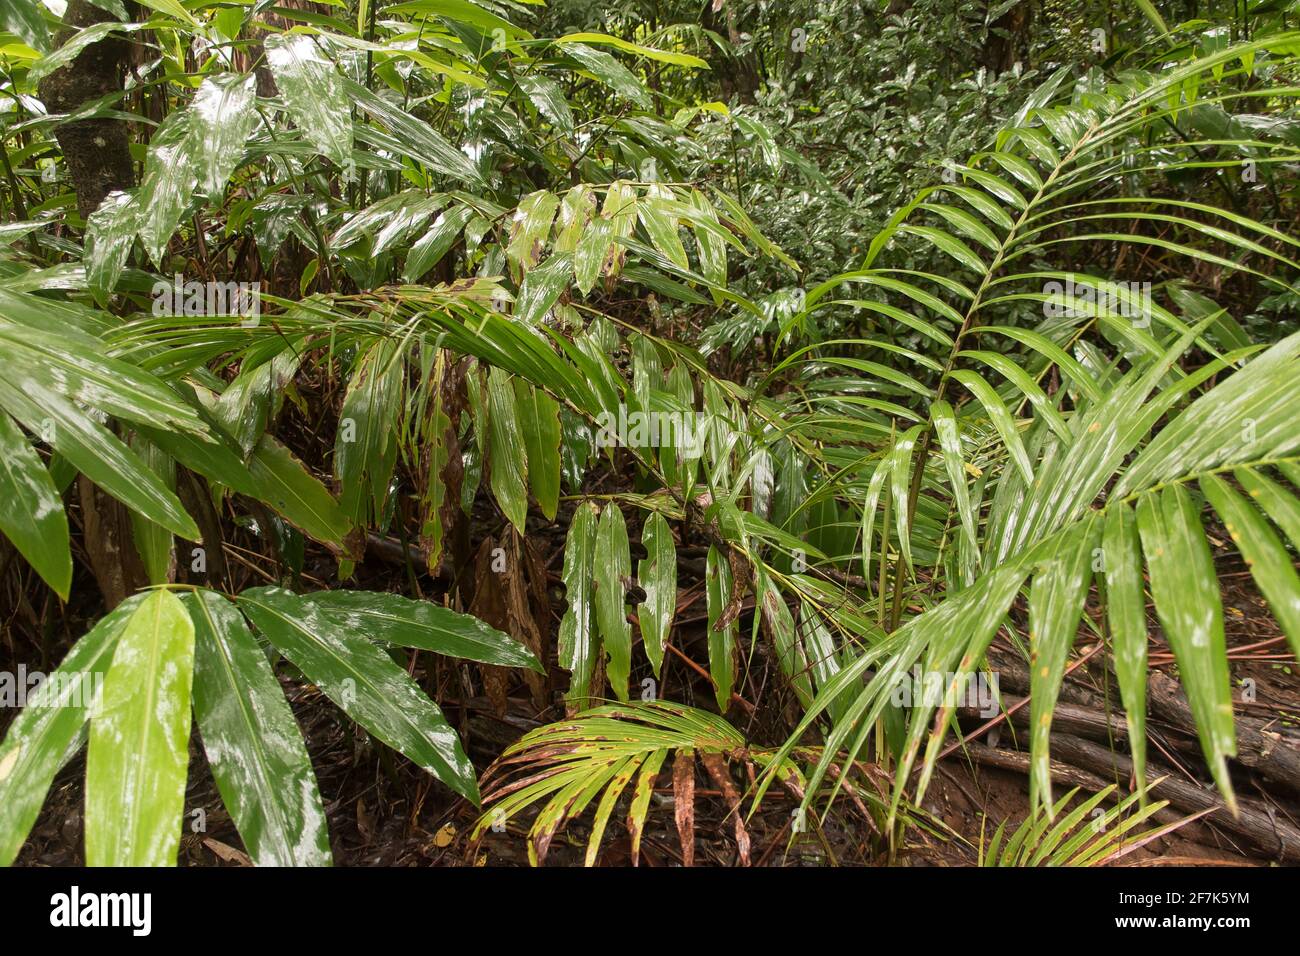 Subtropical lowland rainforest understorey during rain. green leaves and fronds shiny and wet. Tamborine Mountain, Queensland, Australia. Stock Photo